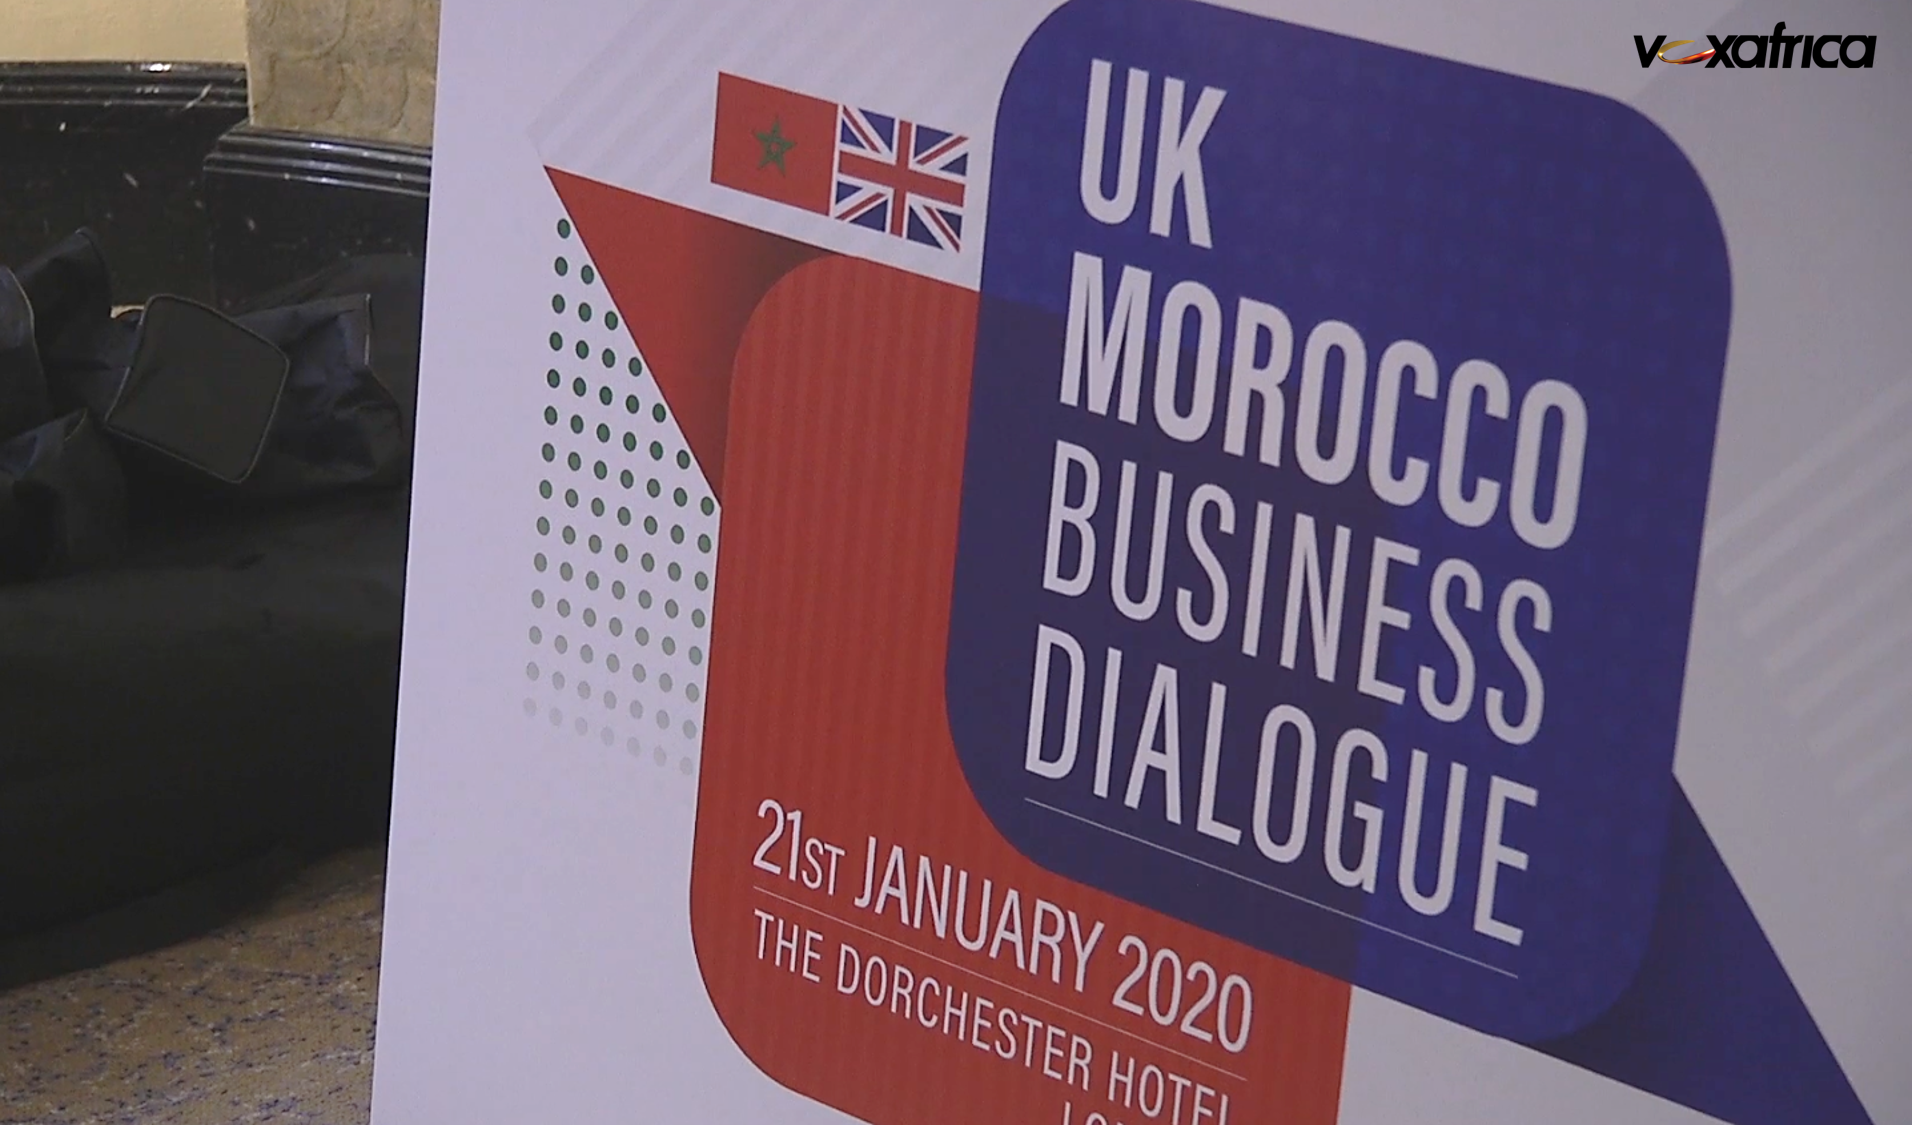 VOX NEWS | HIGHLIGHTS FROM THE UK-MOROCCO BUSINESS DIALOGUE